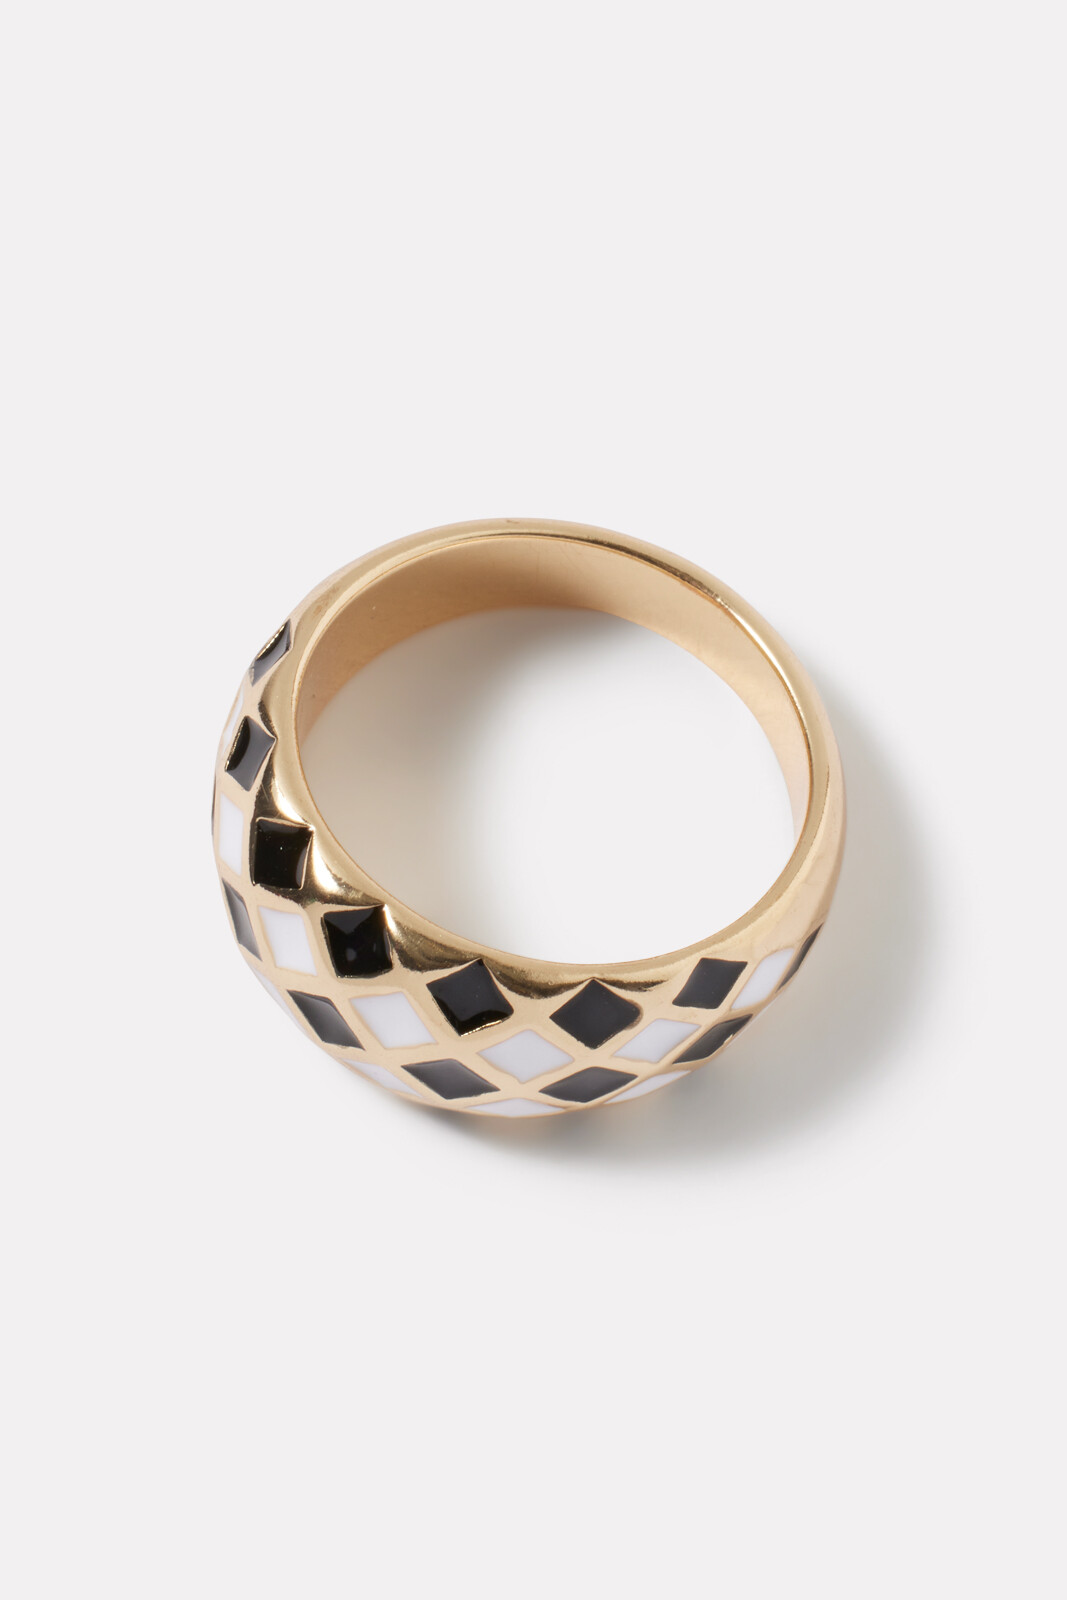 Trudy Checkered Ring